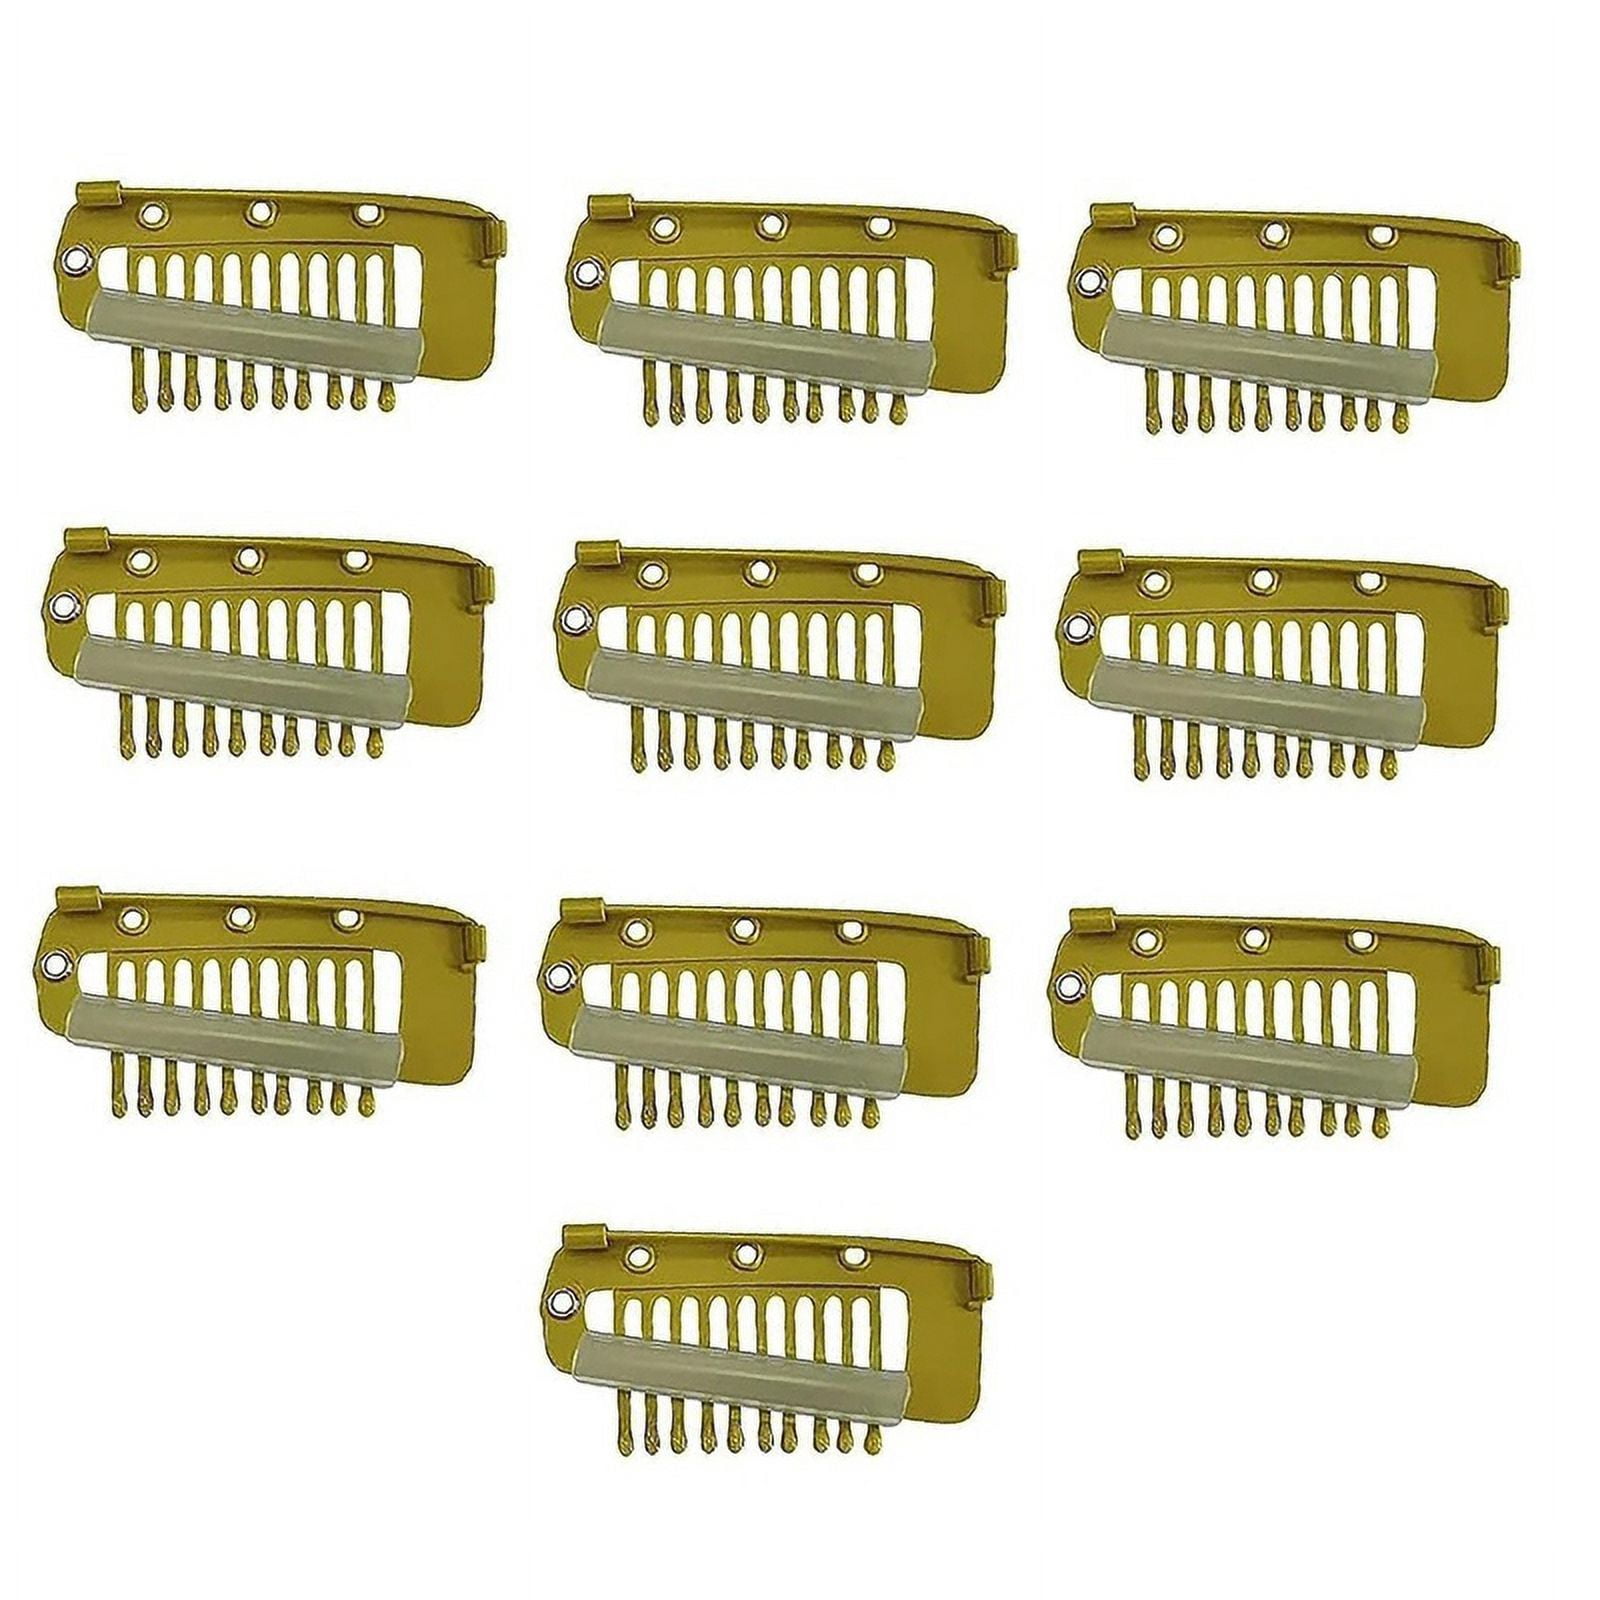 Pack of 10 Strong Chunni Clips with Safety Pin, Easy to Use with Dupatta,  Hijab & Tikka Setting Gold 